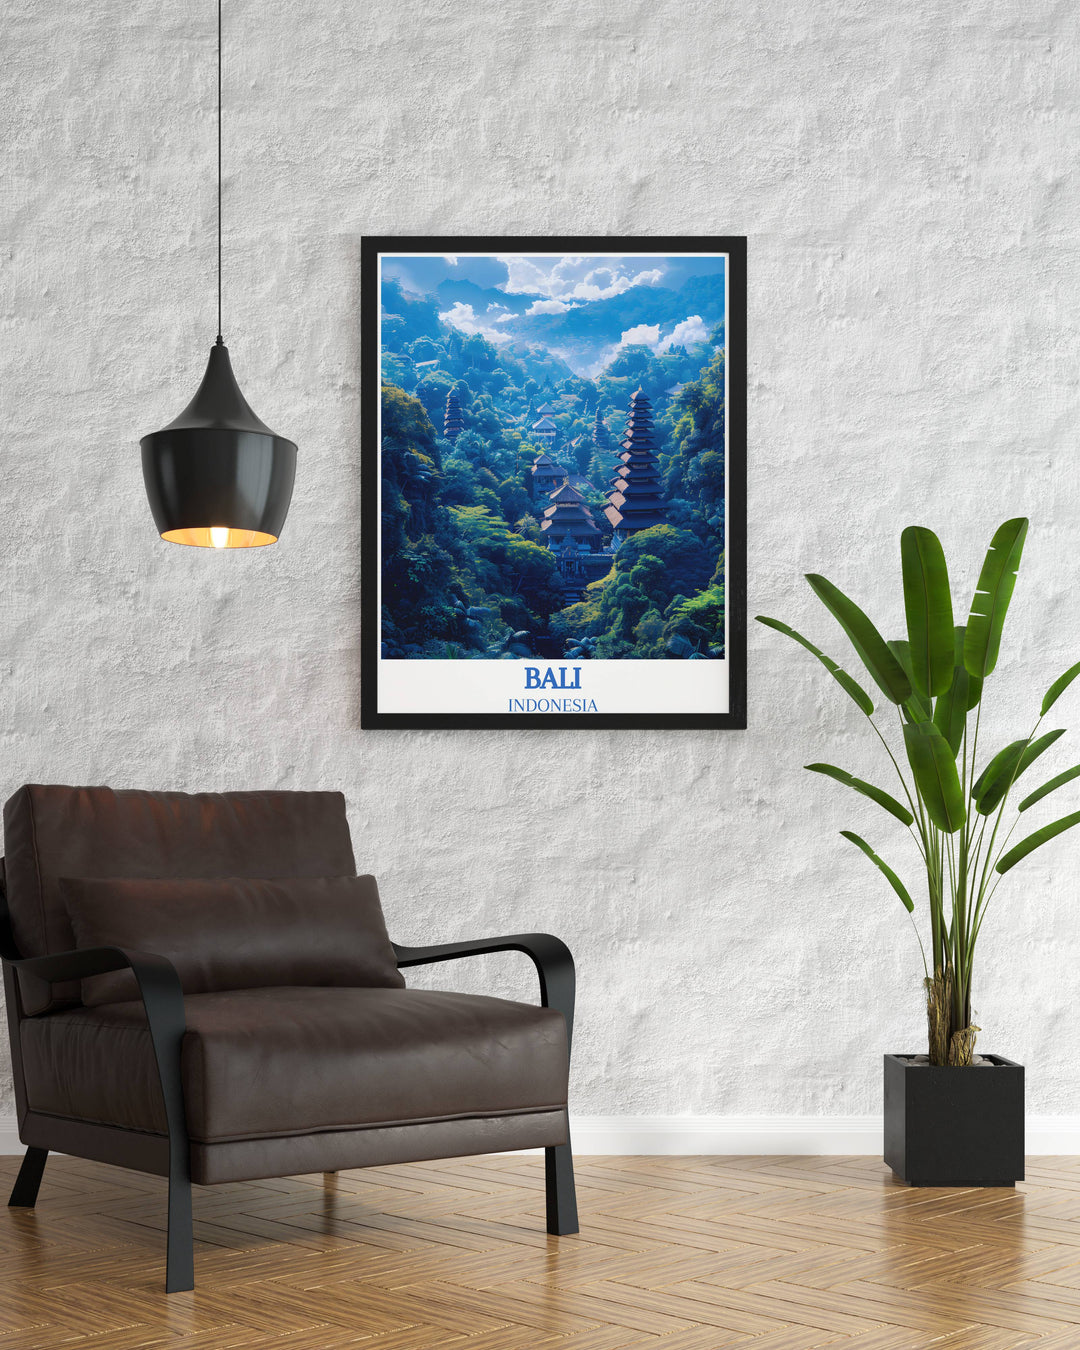 Wall art capturing the scenic beauty of Ubud Monkey Forest, perfect for anyone wanting to add a natural and peaceful element to their decor.